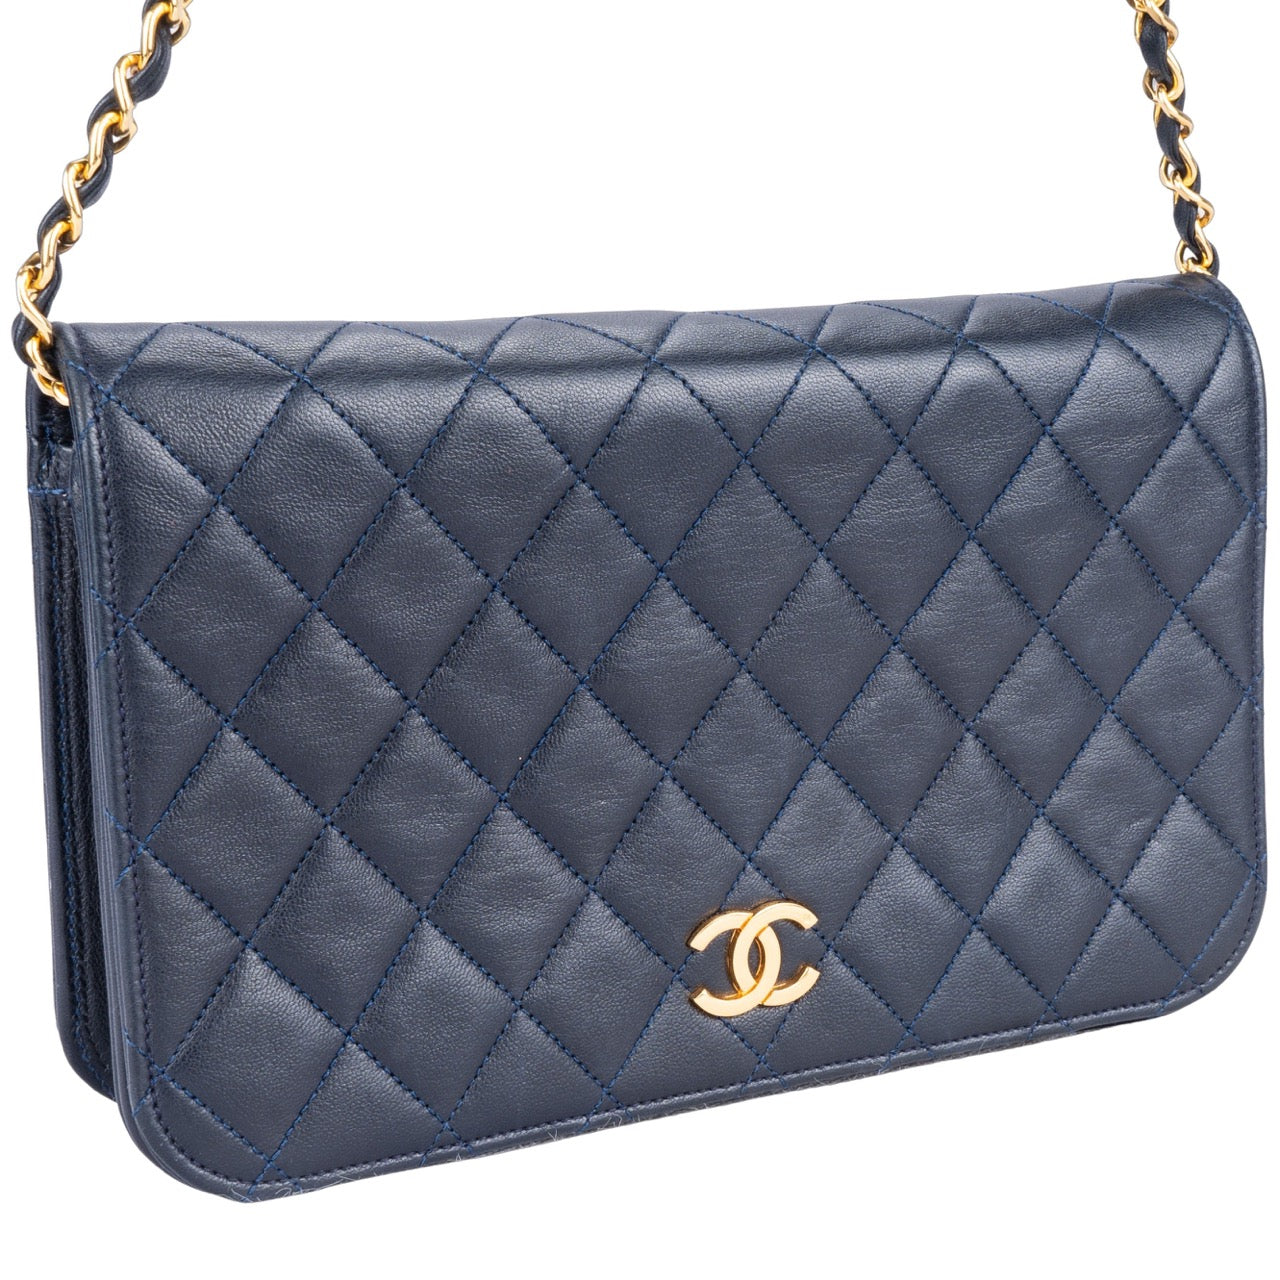 Chanel Quilted Navy Lambskin 24K Gold Single Flap Bag